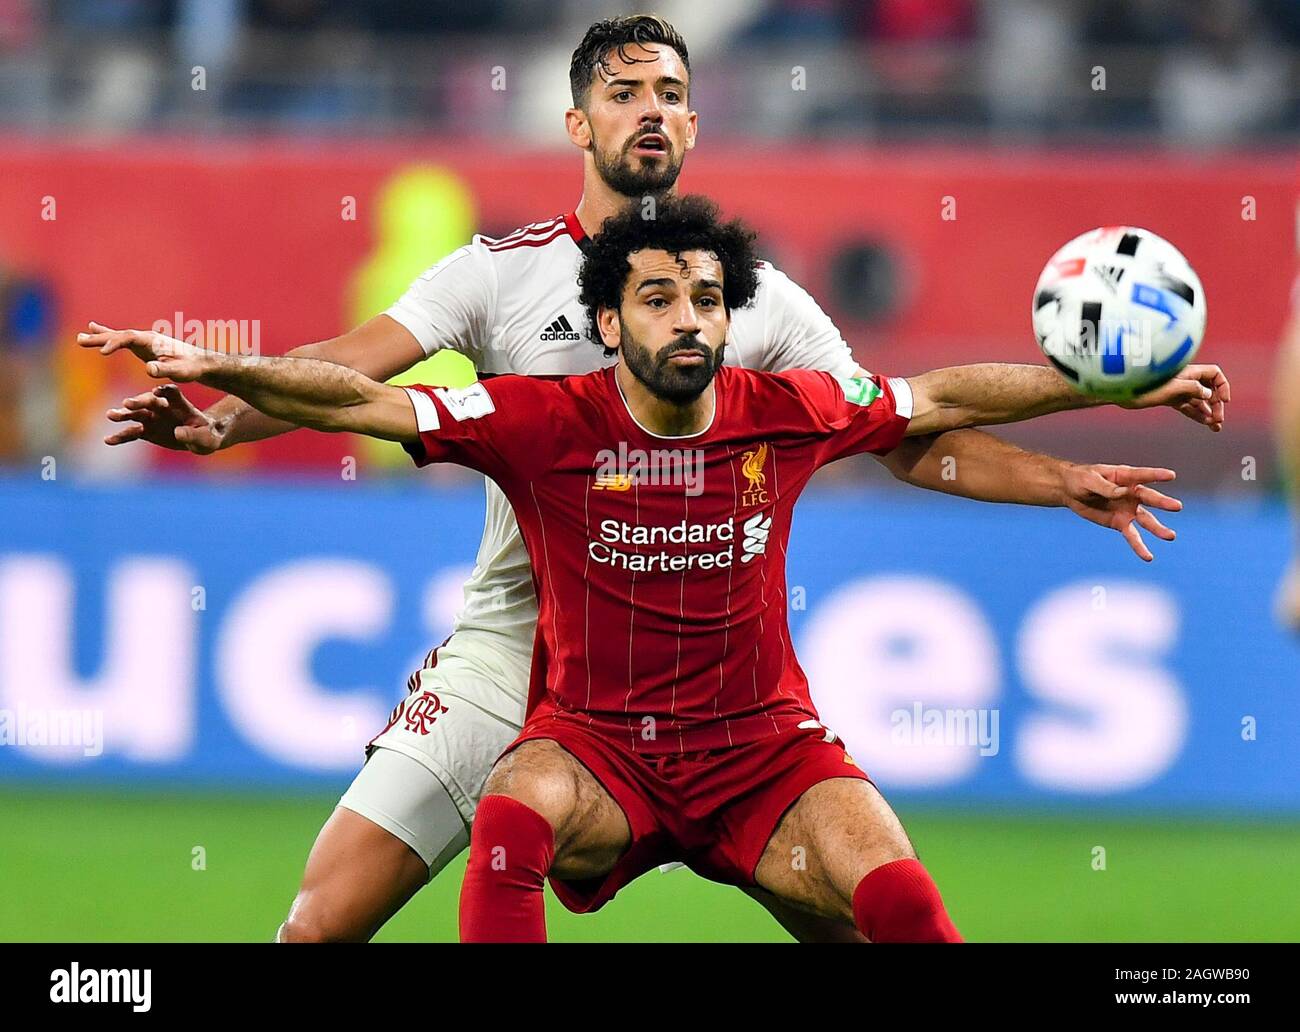 Doha, Qatar. 21st Dec, 2019. Mohamed Salah (front) of Liverpool vies for  the ball with Pablo Mari of Flamengo during the final of the FIFA Club  World Cup Qatar 2019 in Doha,